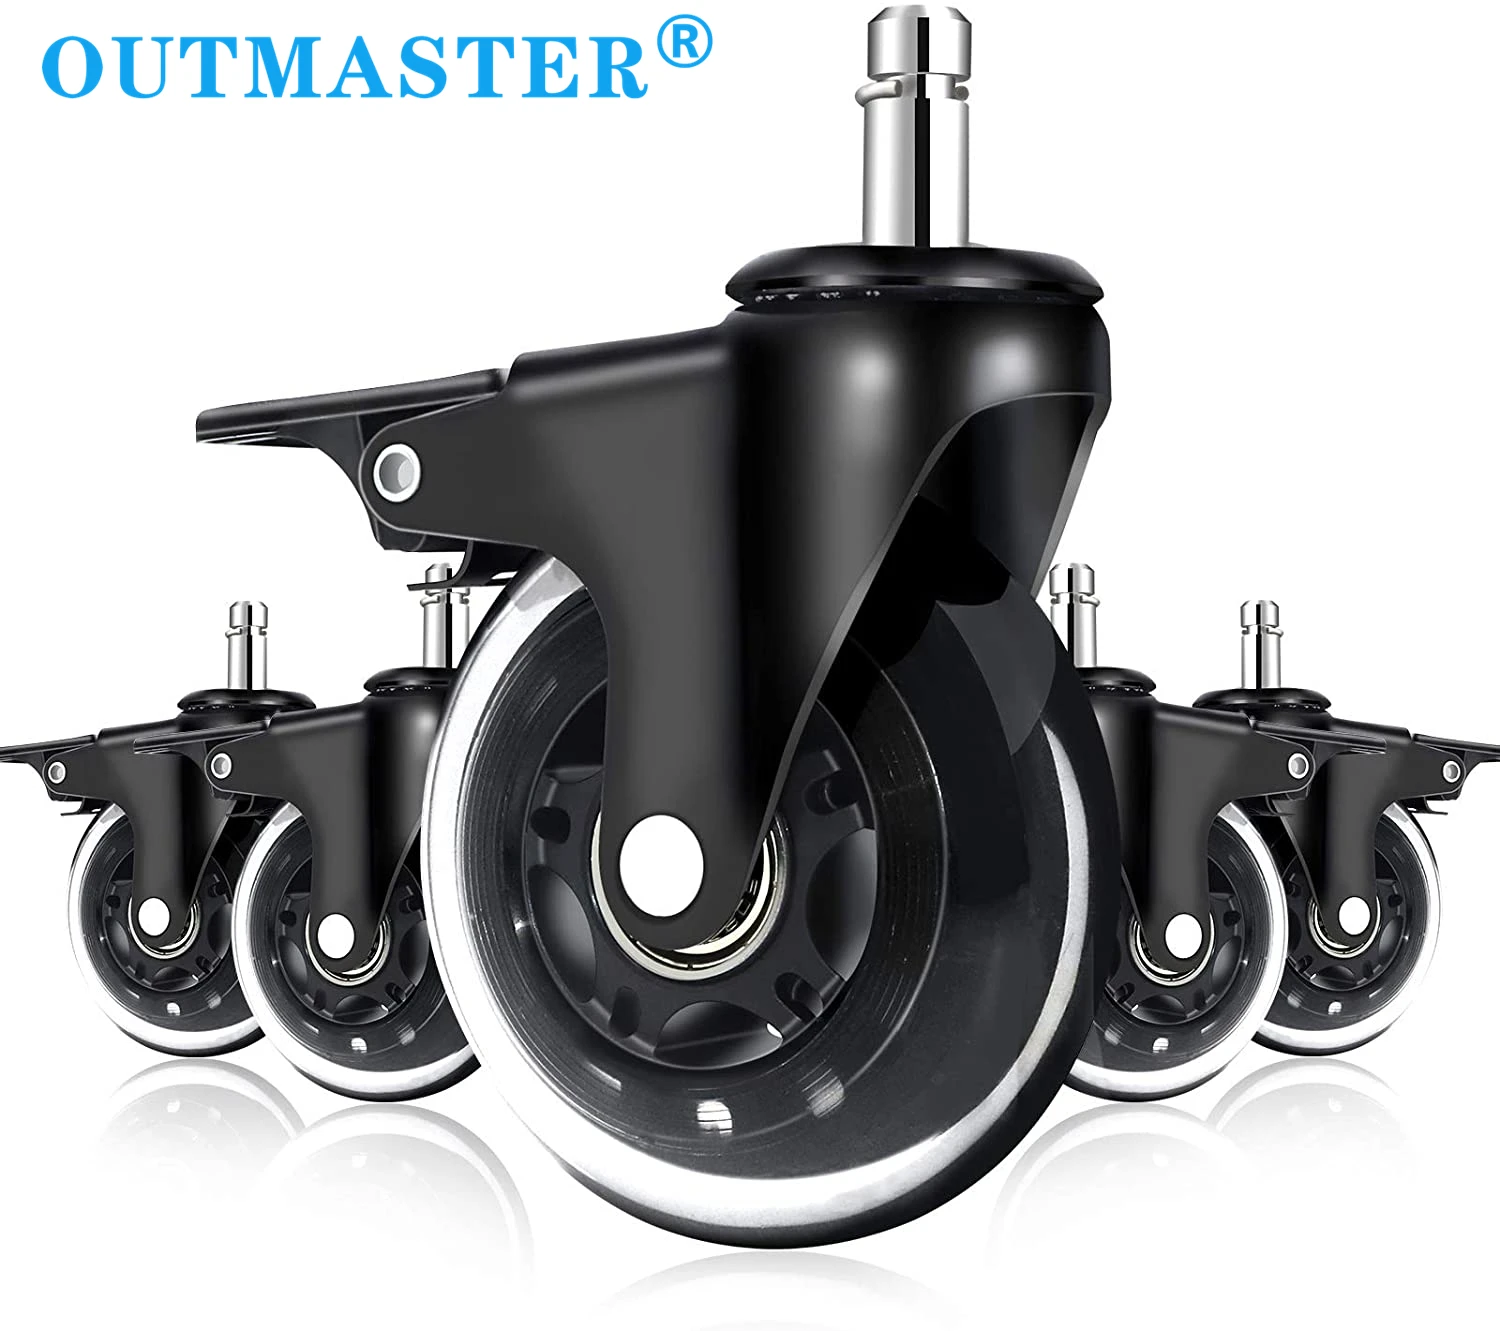 5 Packs  Office Chair Caster Wheels With Brakes 11mm  For Hardwood Floors And Low Pile Carpet,Heavy Duty Quiet Swivel Repl